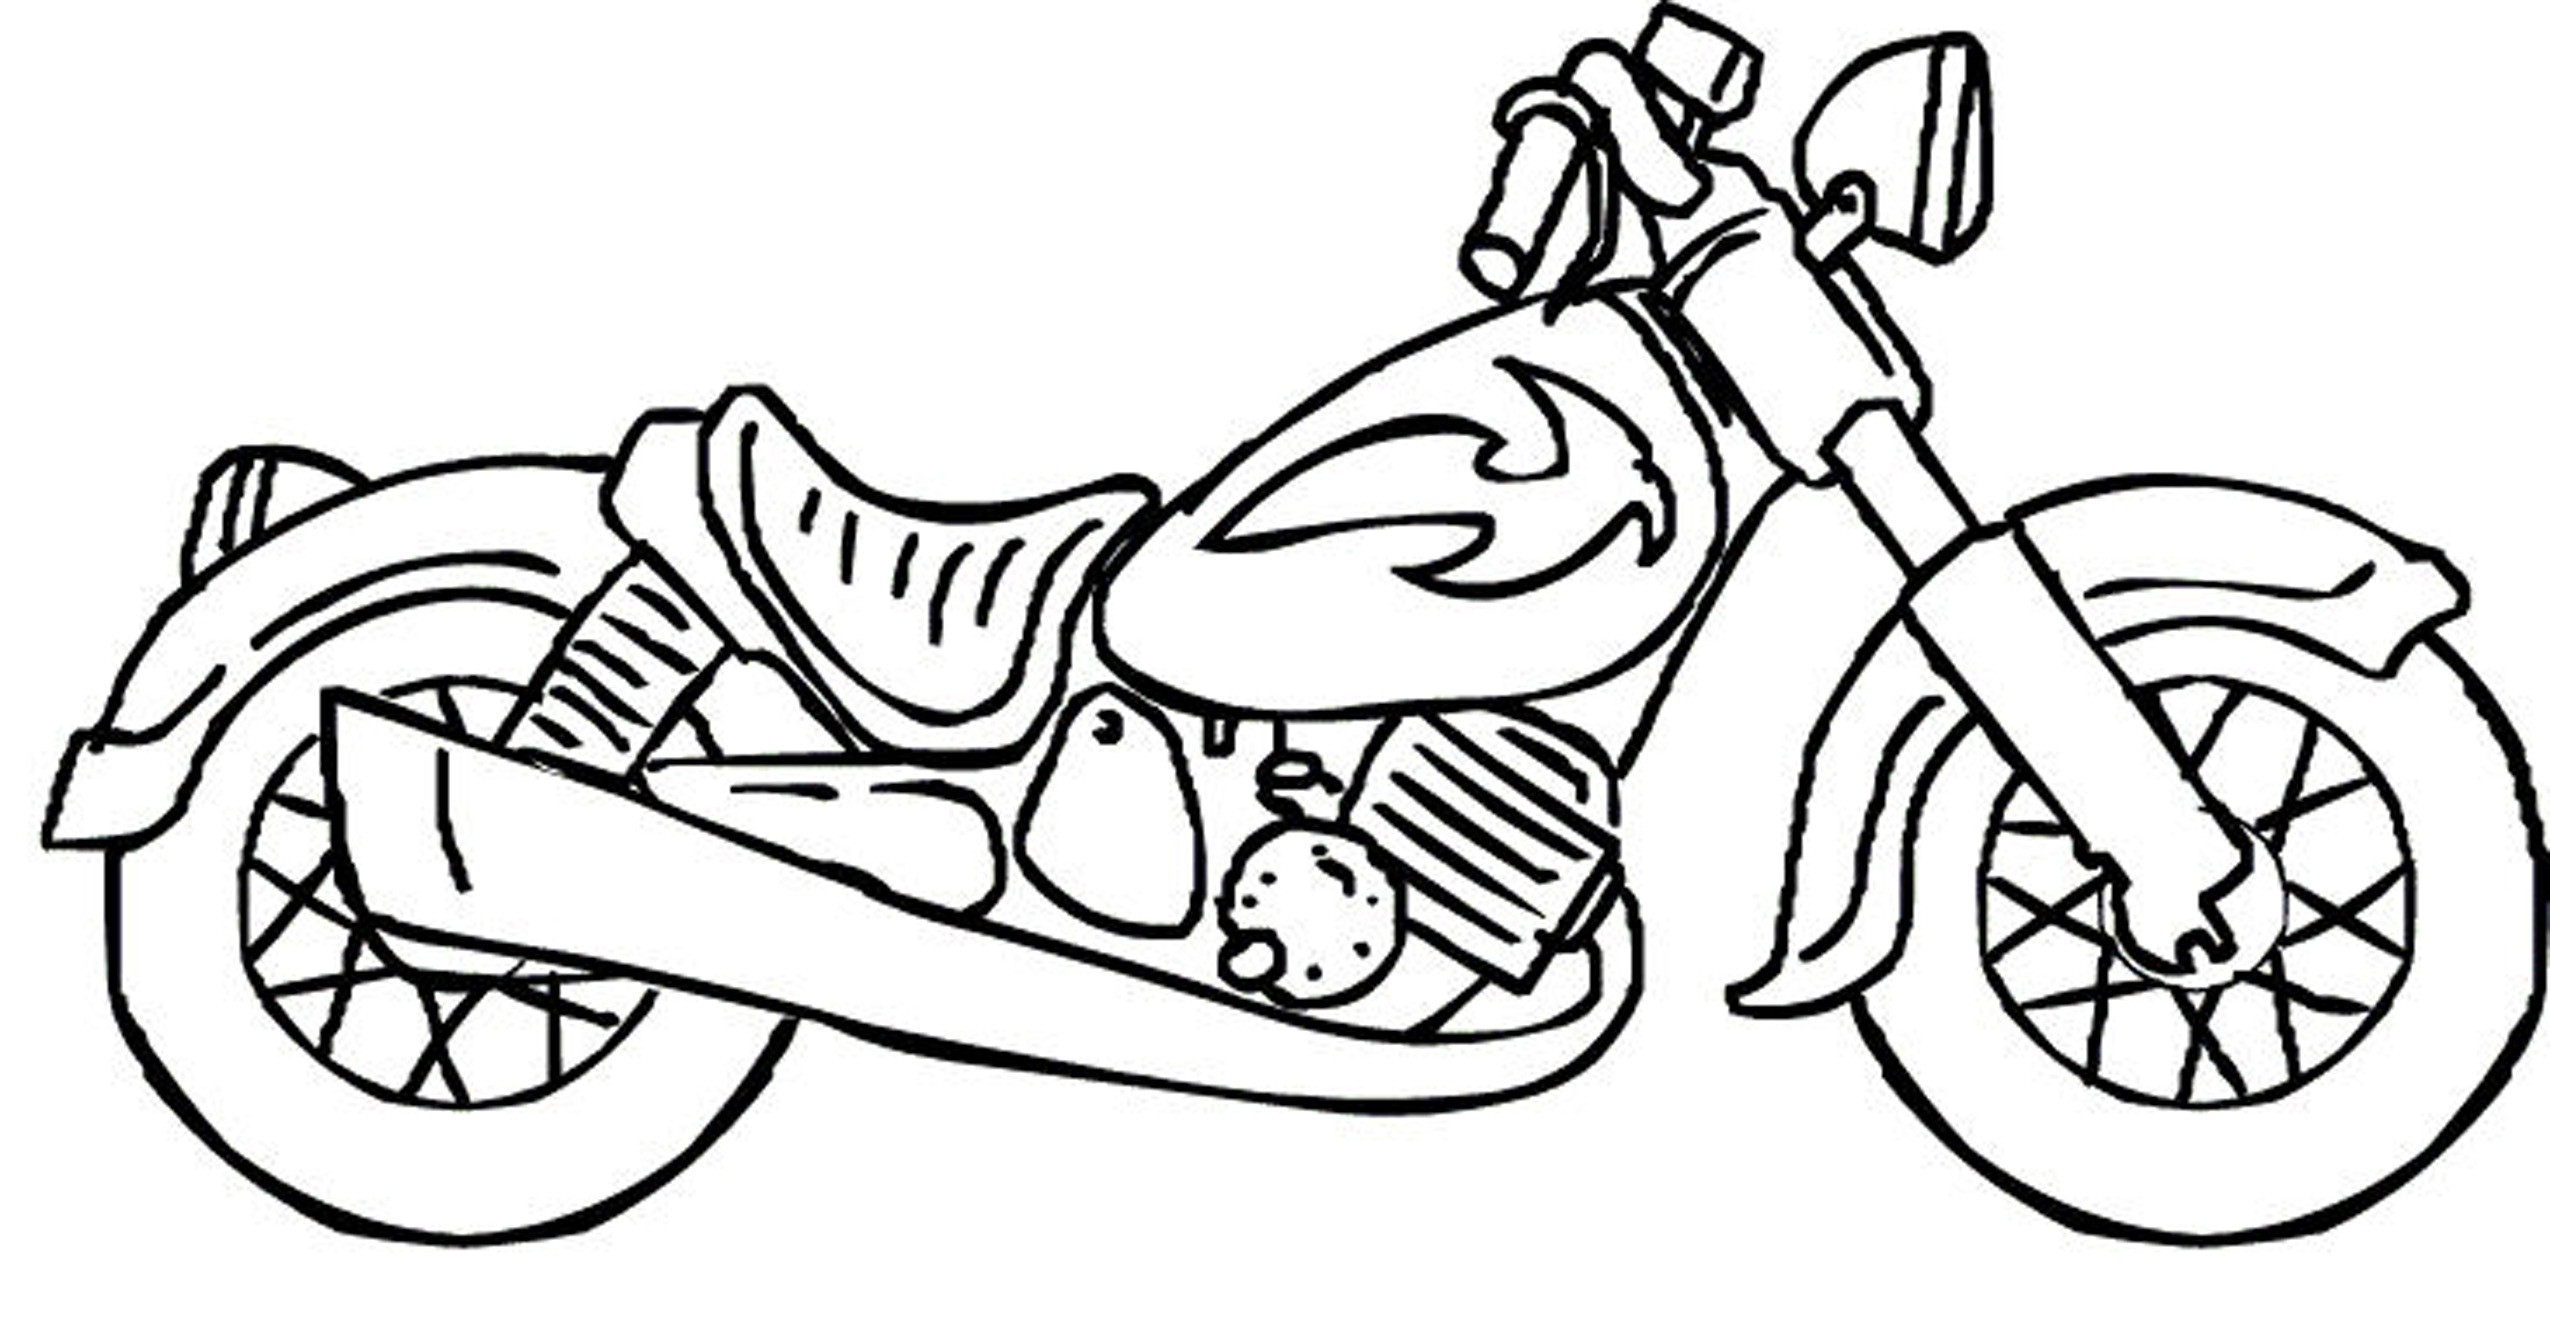 Free Printable Boys Coloring Pages
 Printable Coloring Pages For Boys